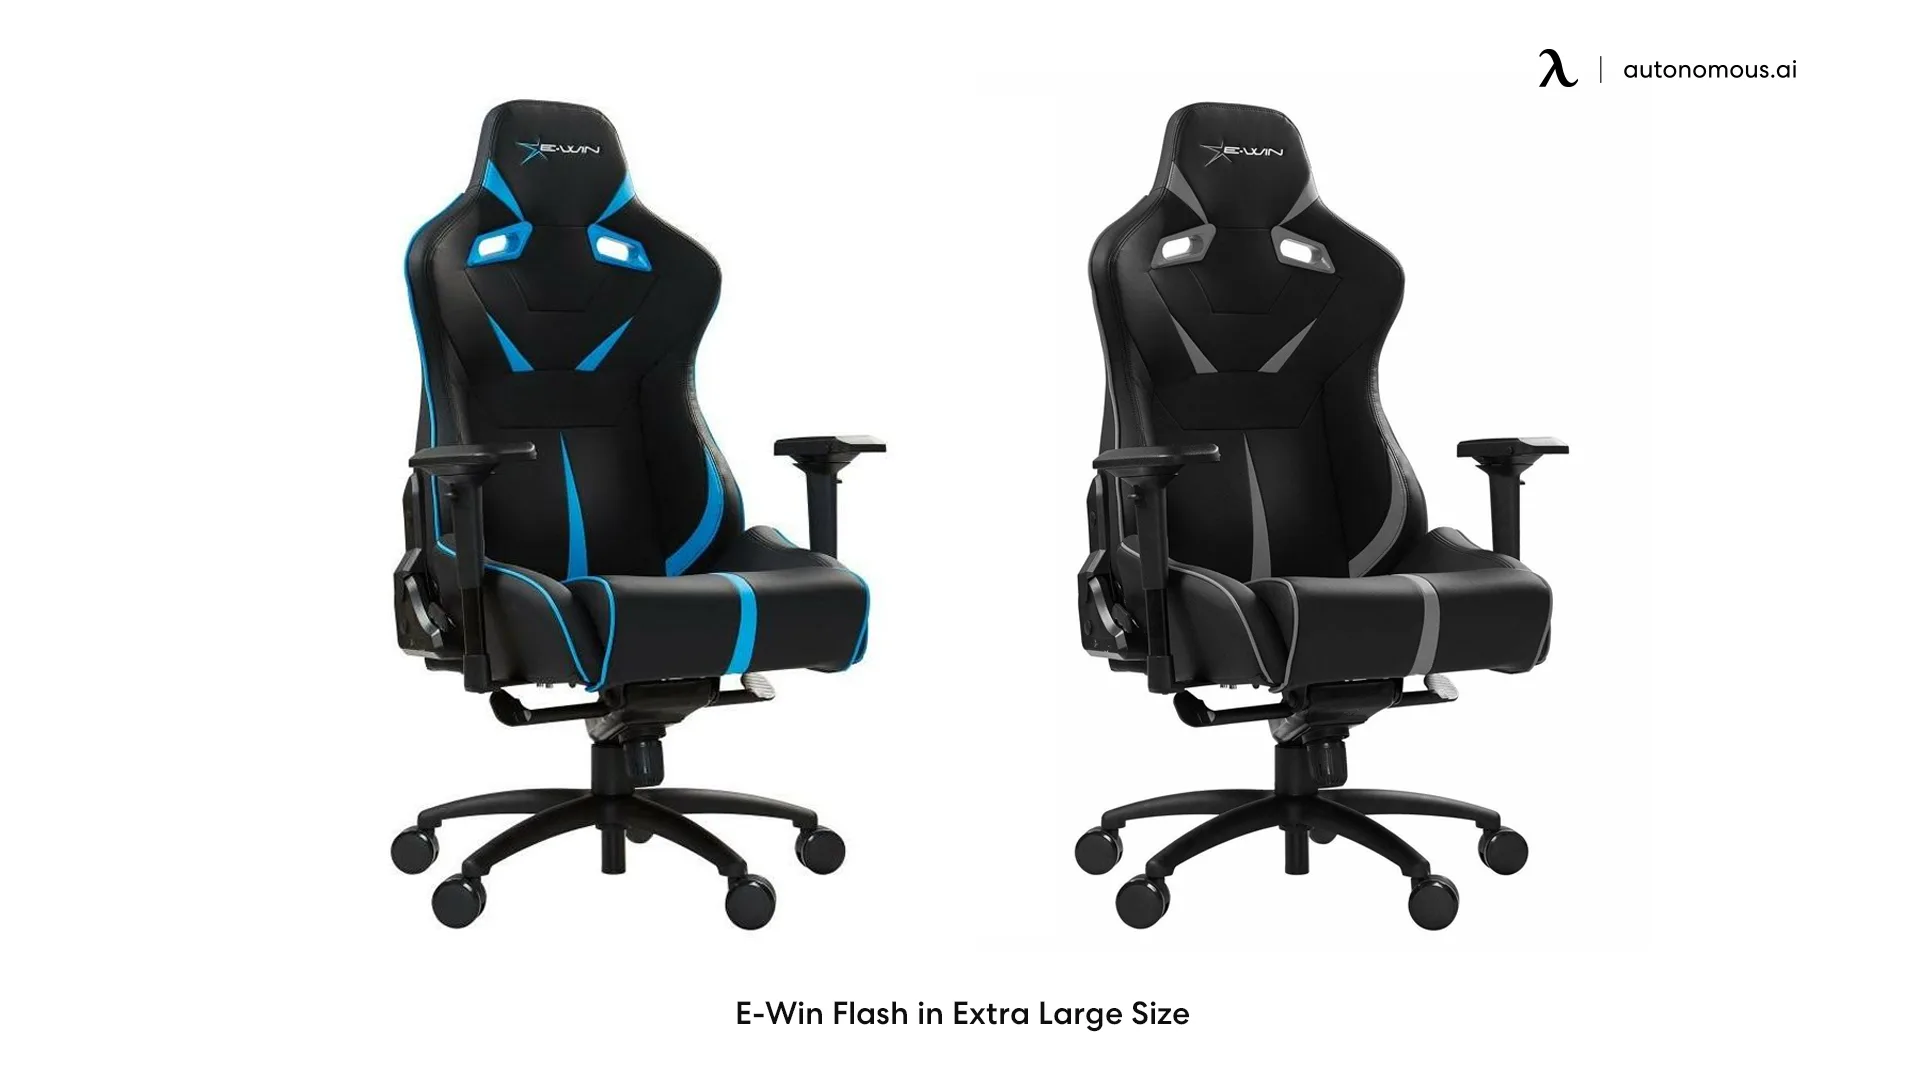 E-Win Flash in Extra Large Size